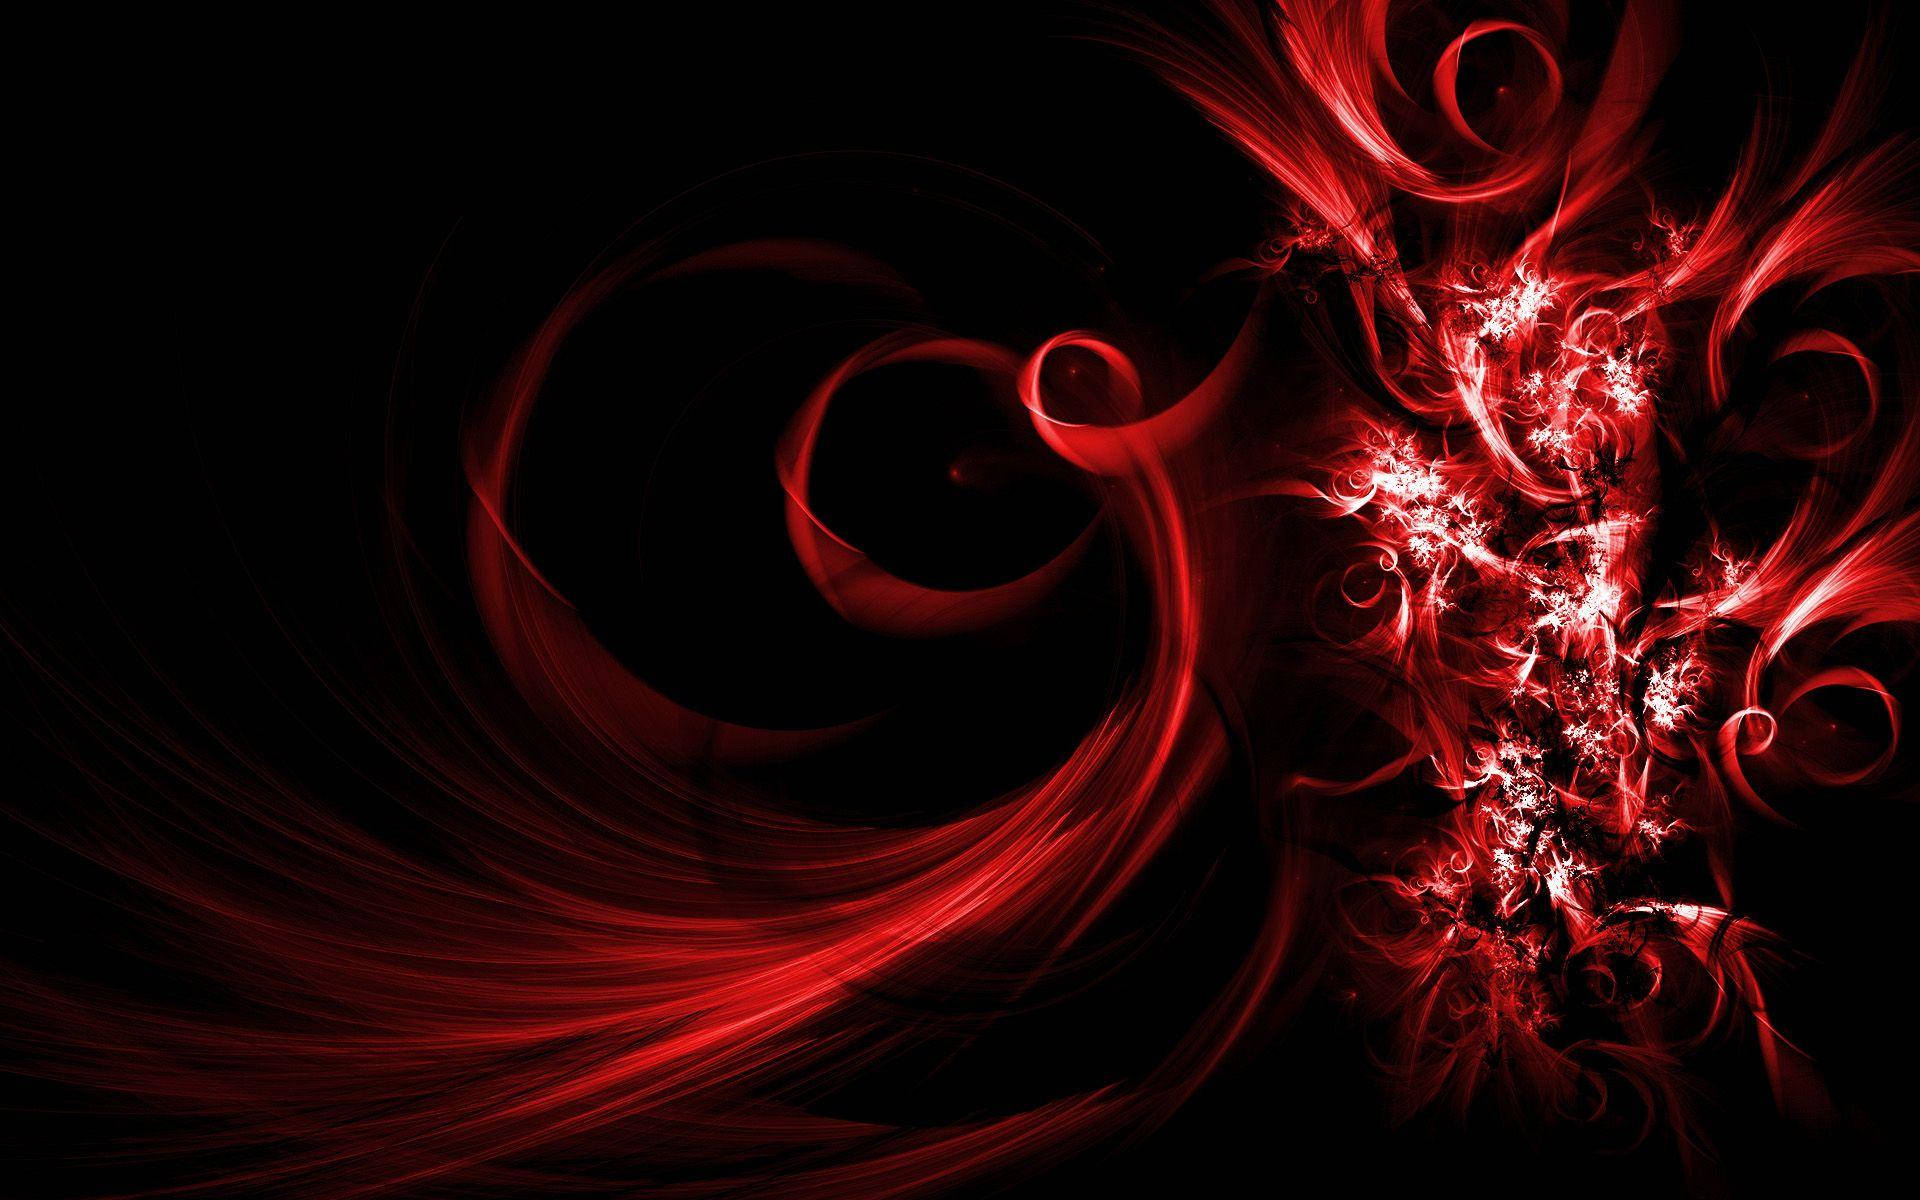 Neon Red Abstract Swirls Background